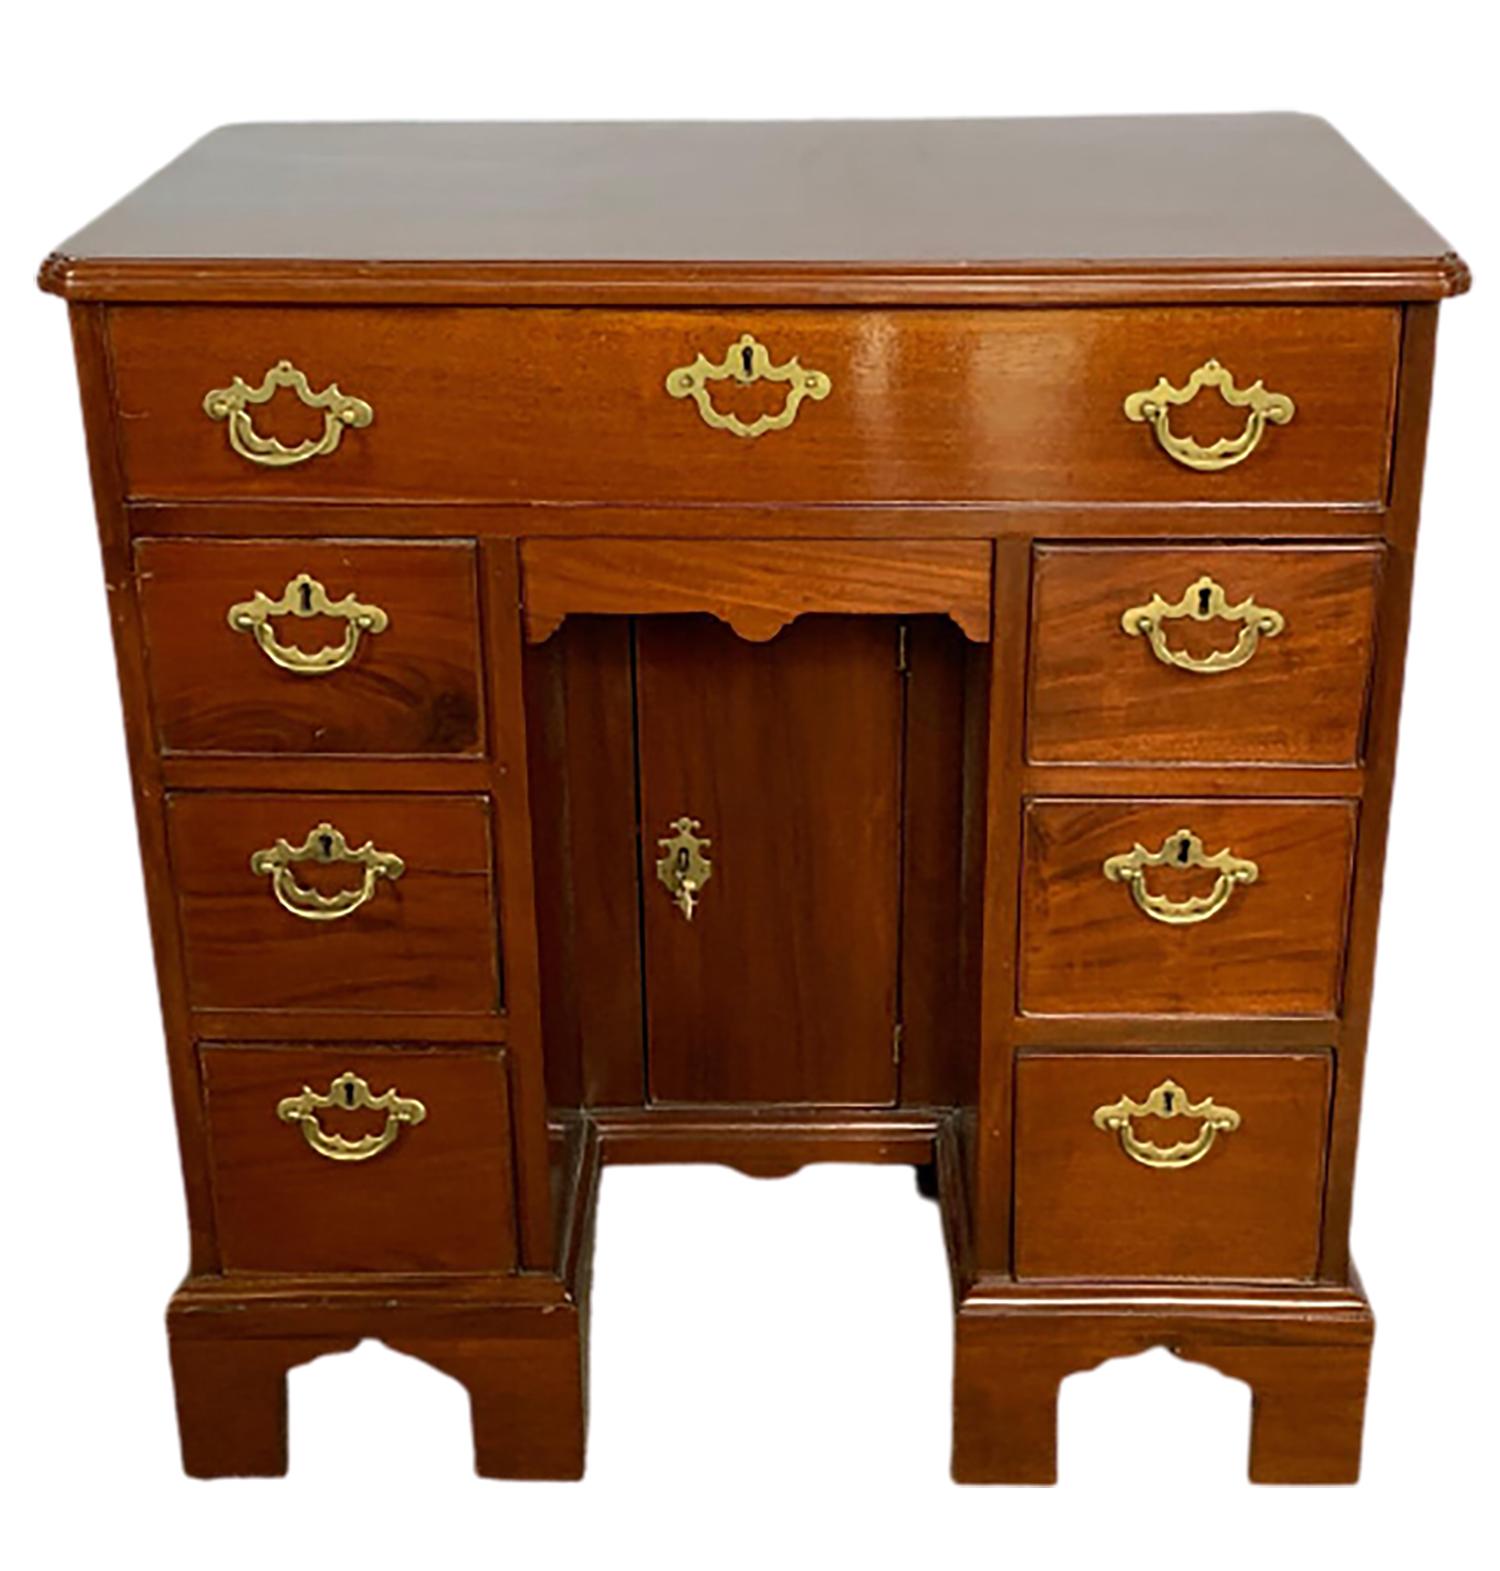 Mid-19th Century Georgian Style Mahogany Knee Hole Desk In Good Condition For Sale In Stamford, CT